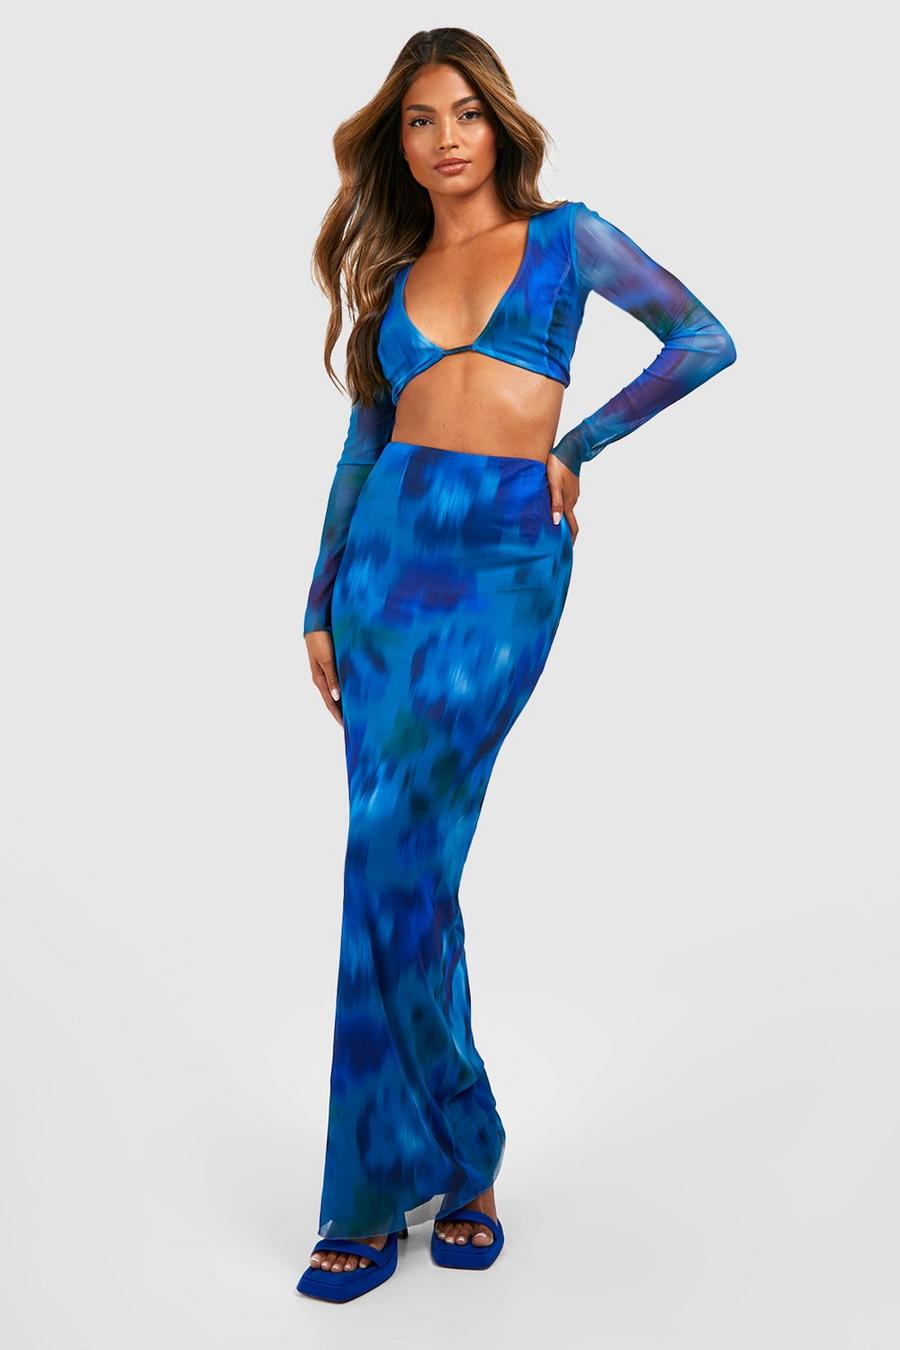 Pacific blue Blurred Floral Mesh Bralette & Maxi Skirt image number 1